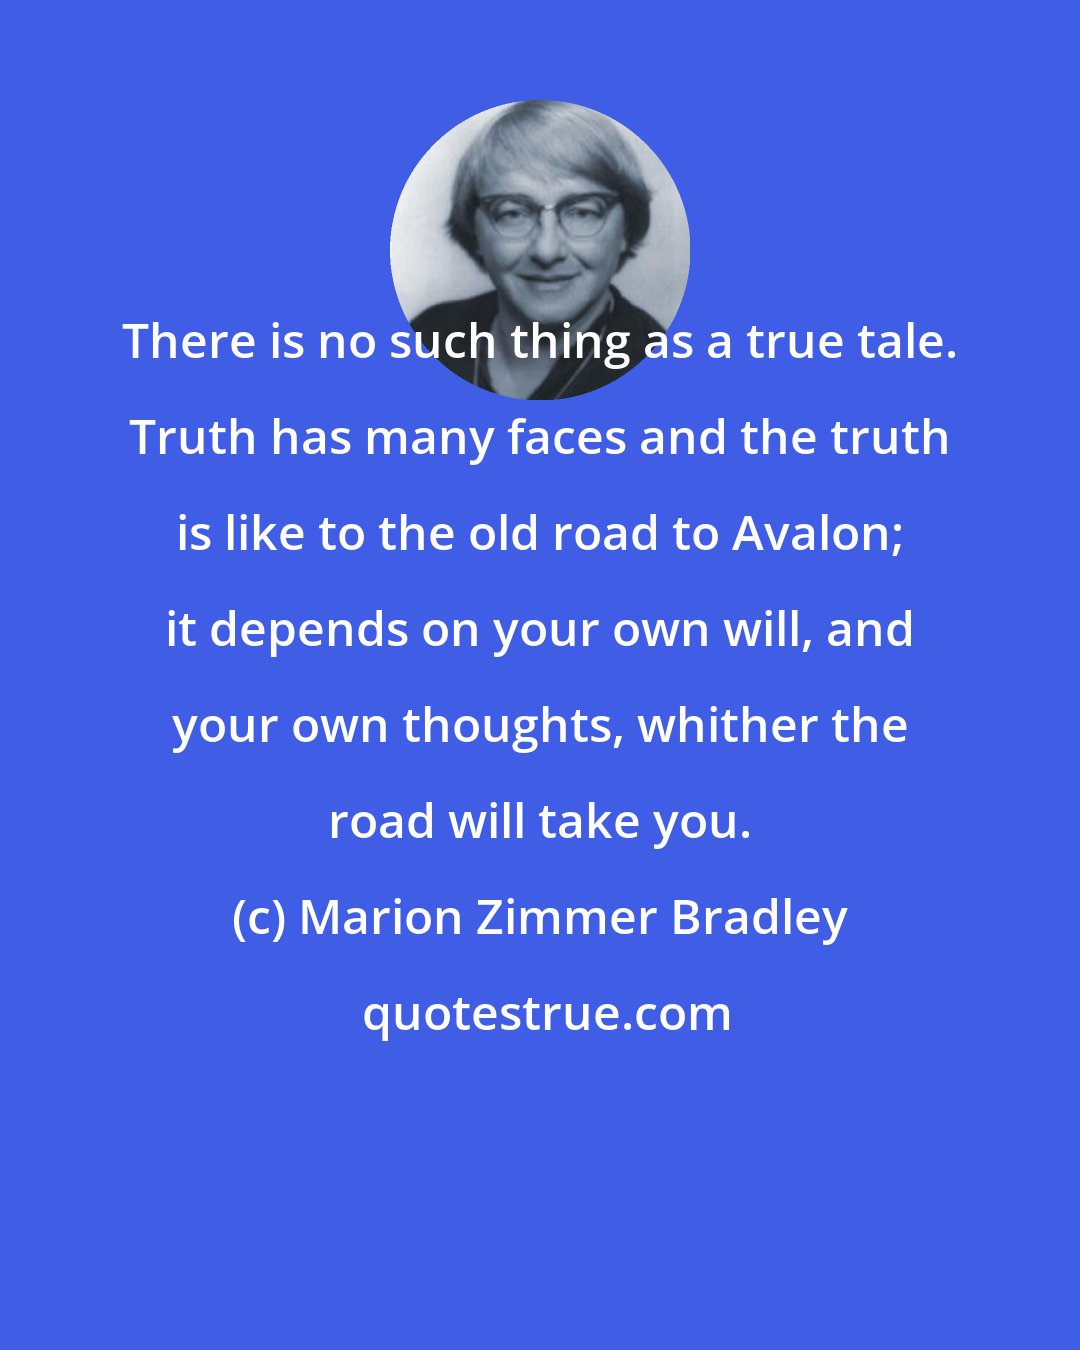 Marion Zimmer Bradley: There is no such thing as a true tale. Truth has many faces and the truth is like to the old road to Avalon; it depends on your own will, and your own thoughts, whither the road will take you.